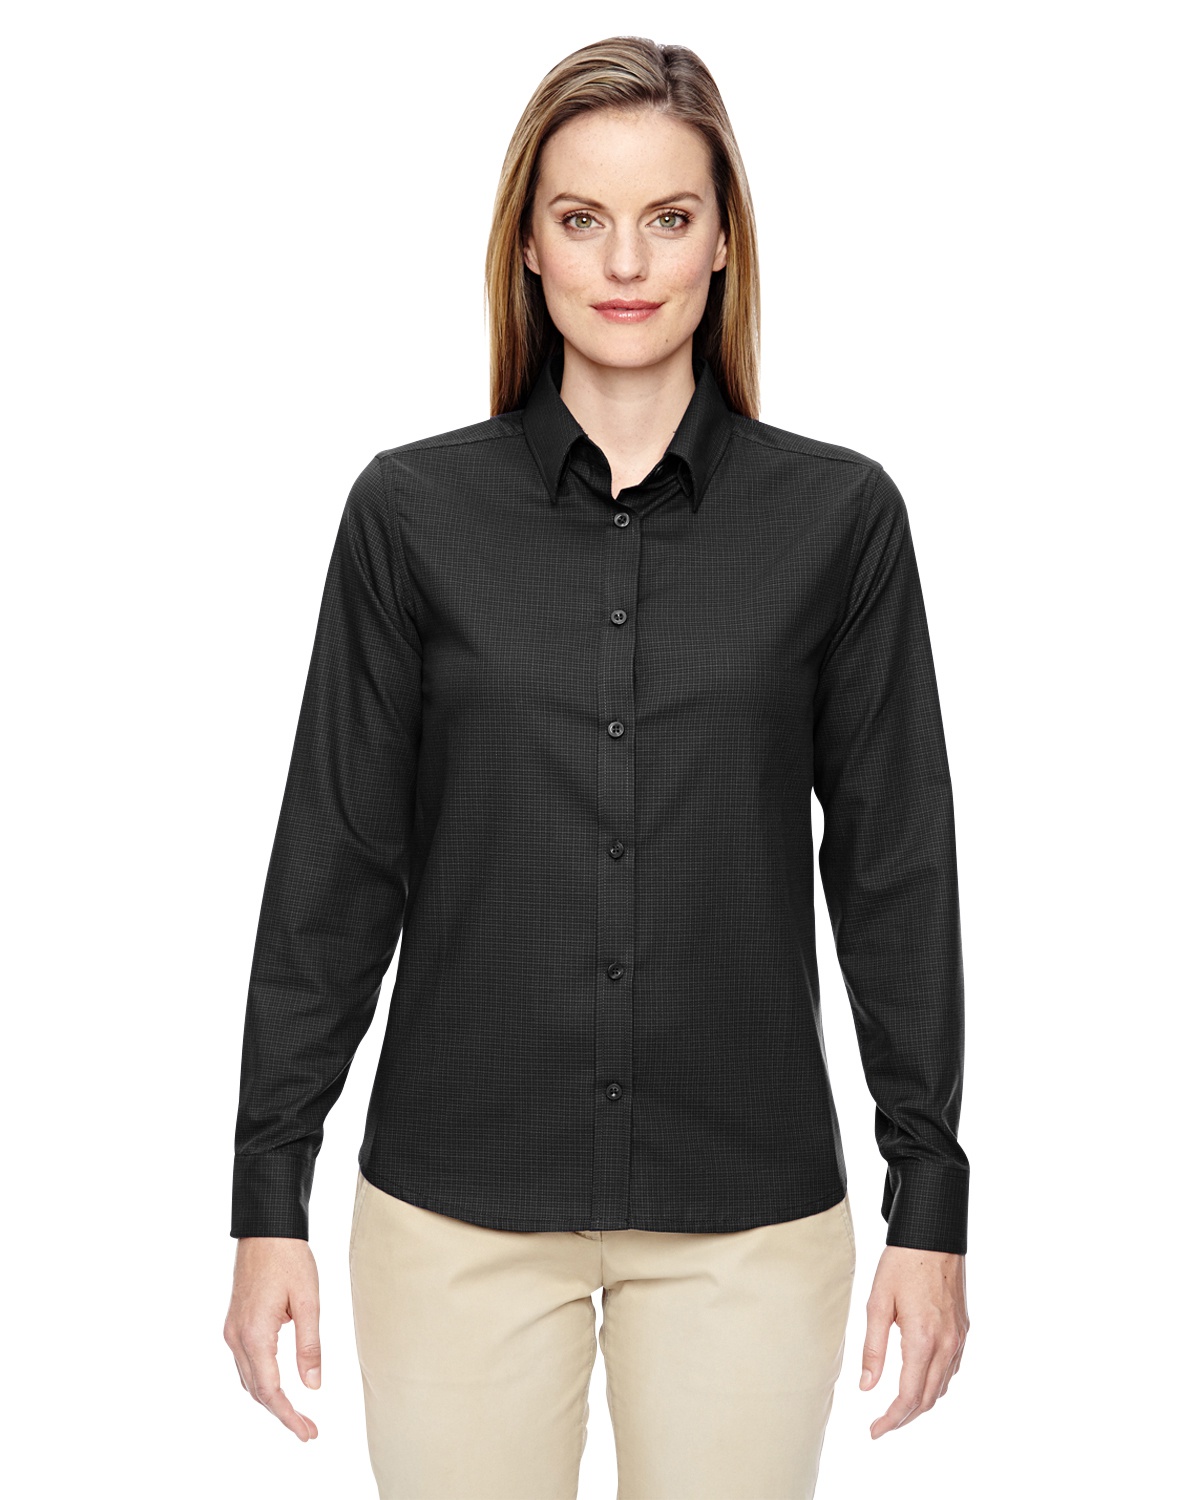 'Ash City - North End 77043 Ladies' Paramount Wrinkle-Resistant Cotton Blend Twill Checkered Shirt'